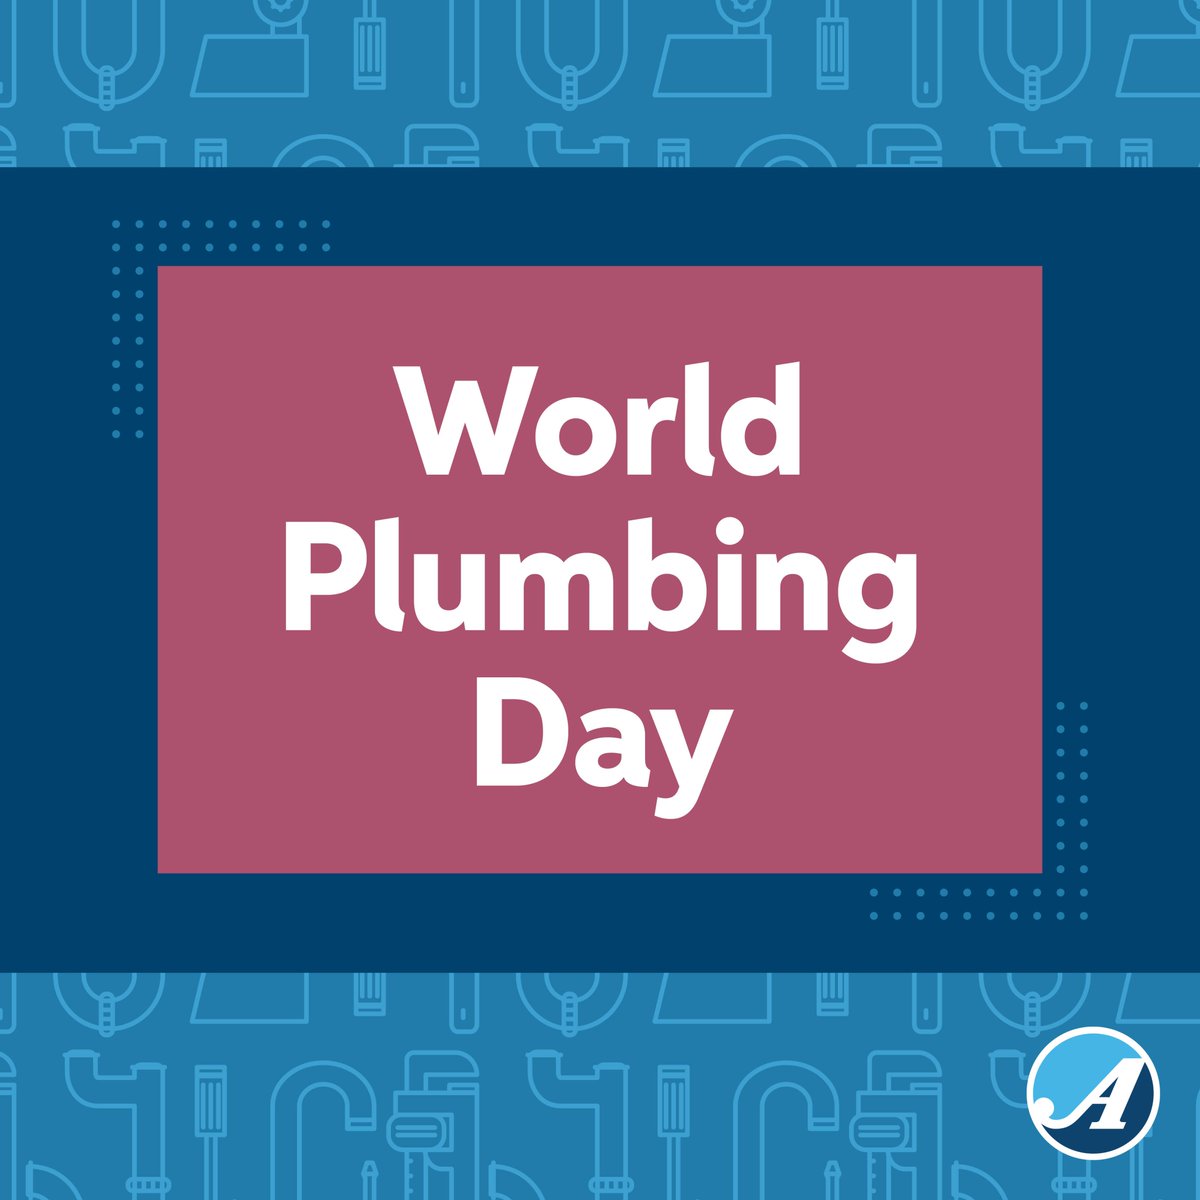 Thank you to all the plumbers on this #WorldPlumbingDay  for helping
put lives back together. Let us know in the comments who your favorite plumber is.

#independentinsuranceagent #locallyowned #veteranowned #TrustedChoice #wecanhelpprotectwhatmattersmost